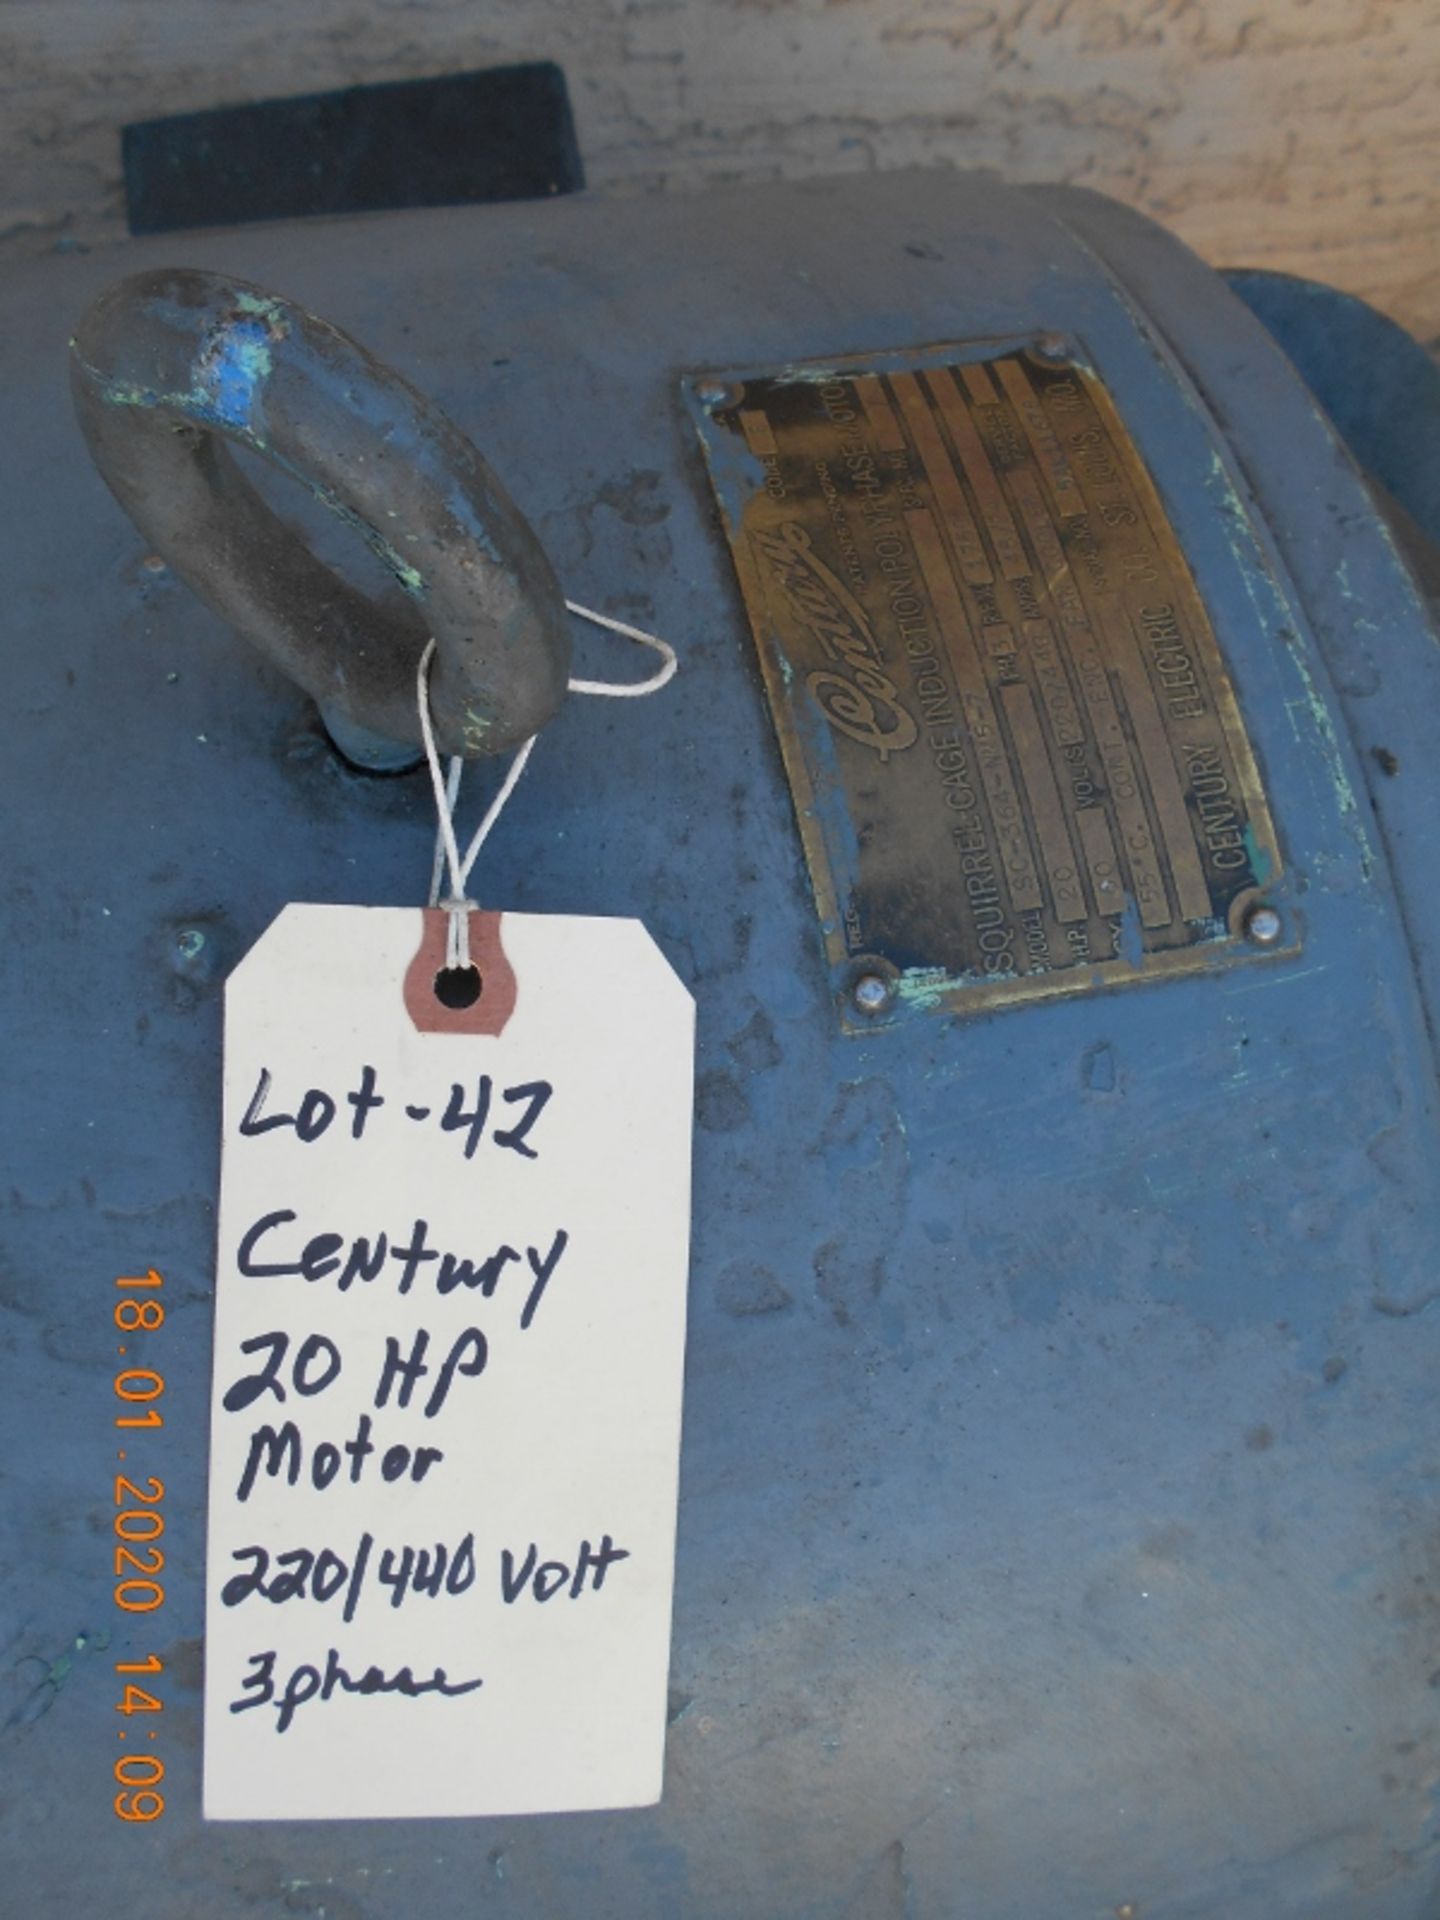 Century 20Hp Electric Motor 220/440 Volt 3 phase - Image 2 of 2